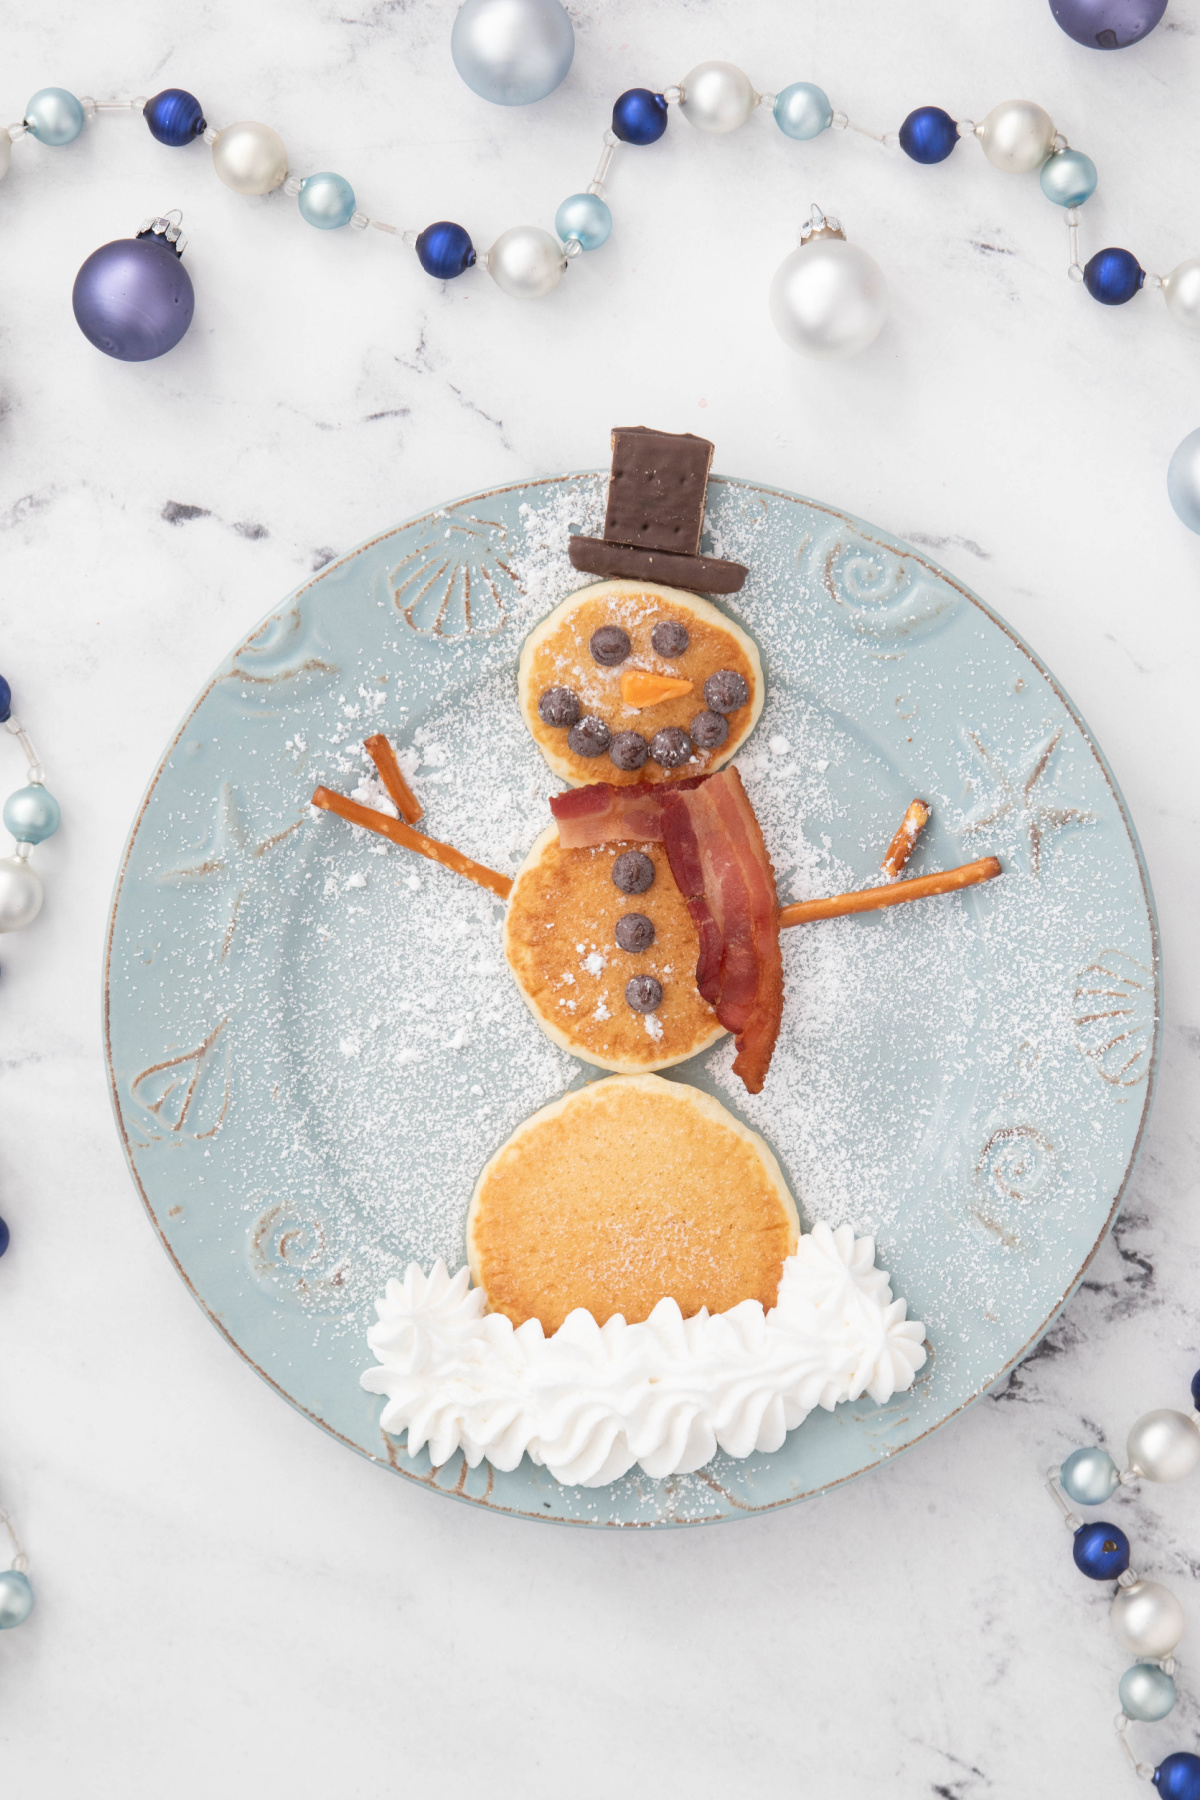 A plate of pancakes in the shape of a snowman surrounded by Christmas decor